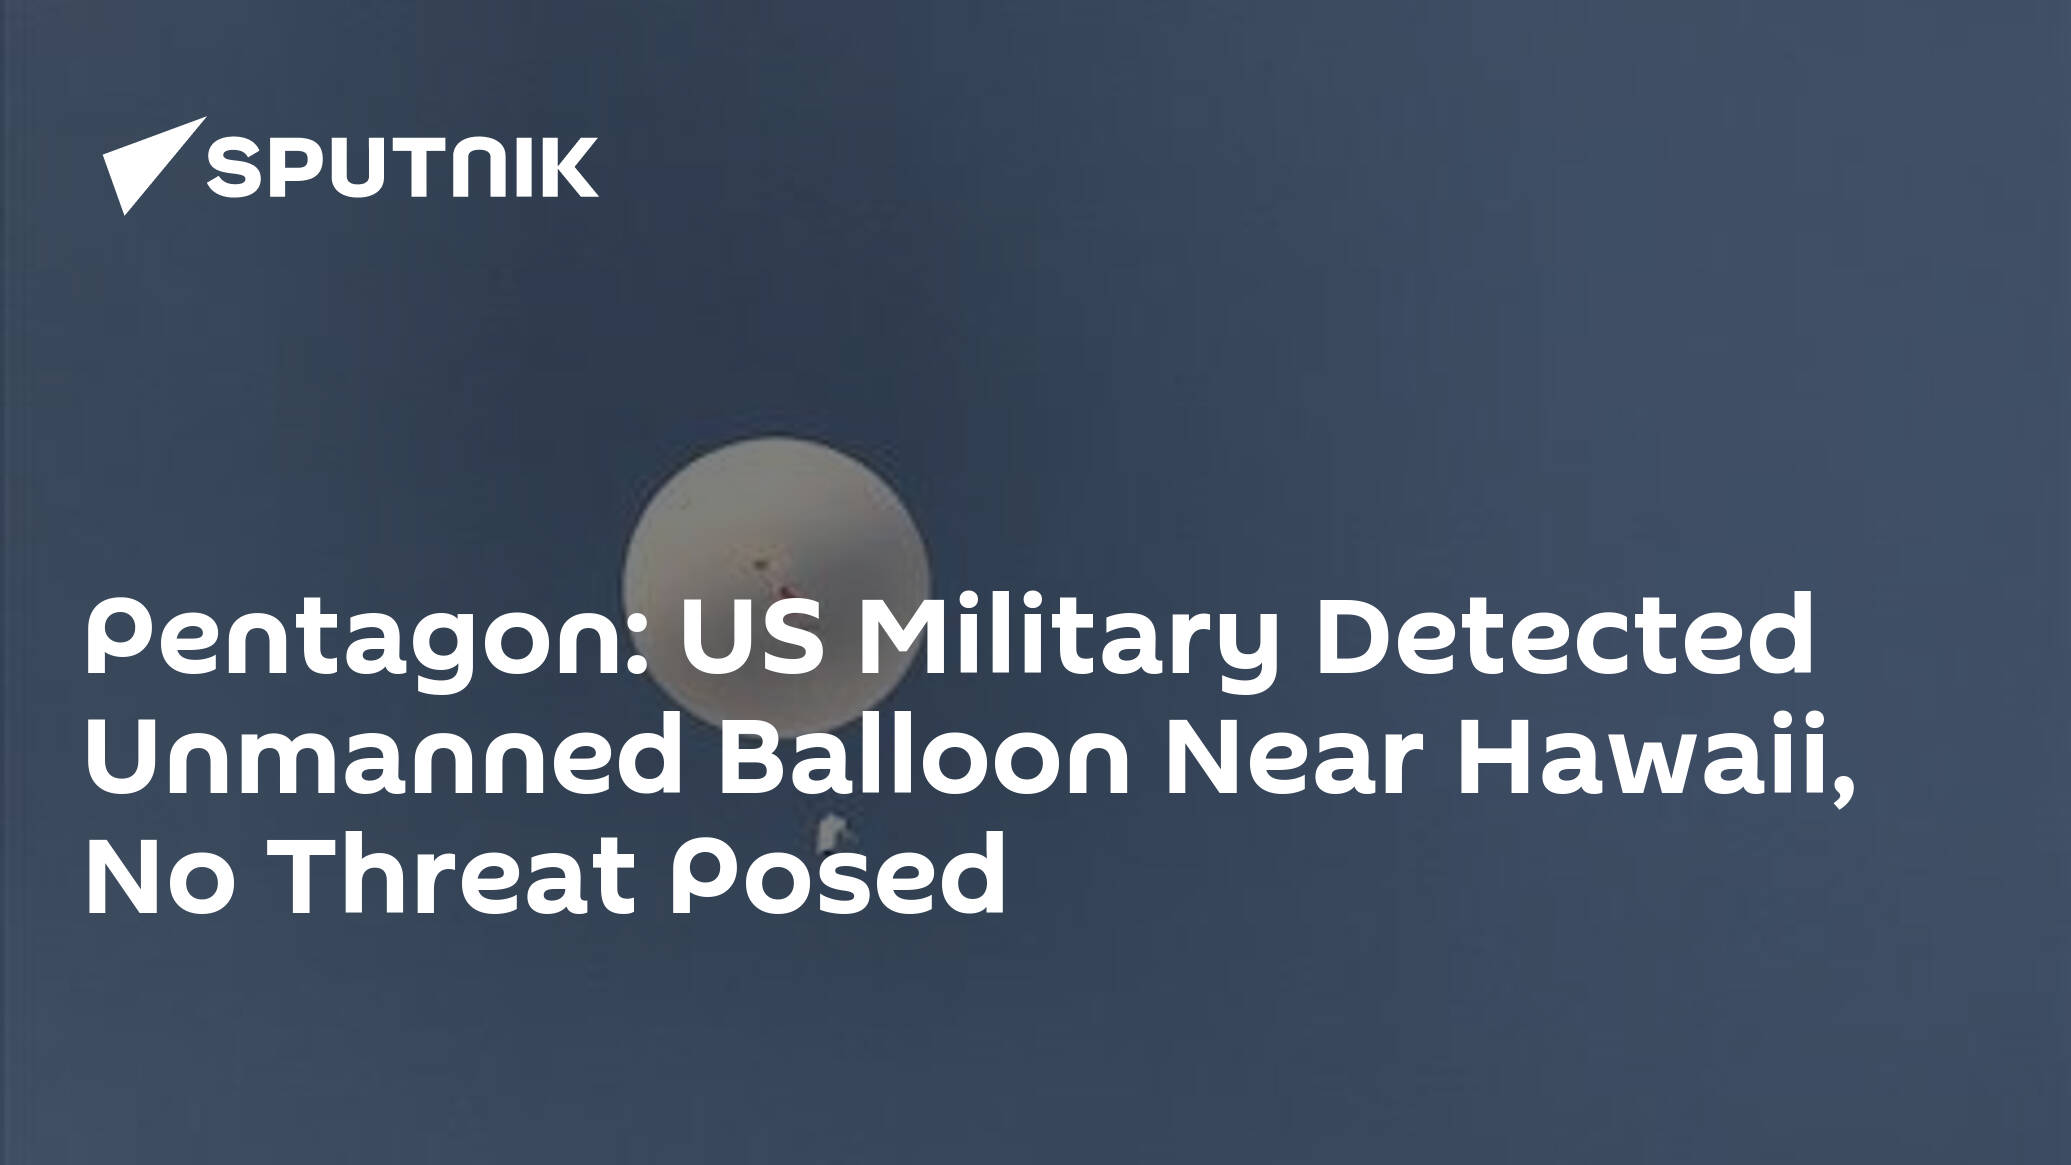 US Military Reportedly Tracking Another Balloon That Flew Over Hawaii